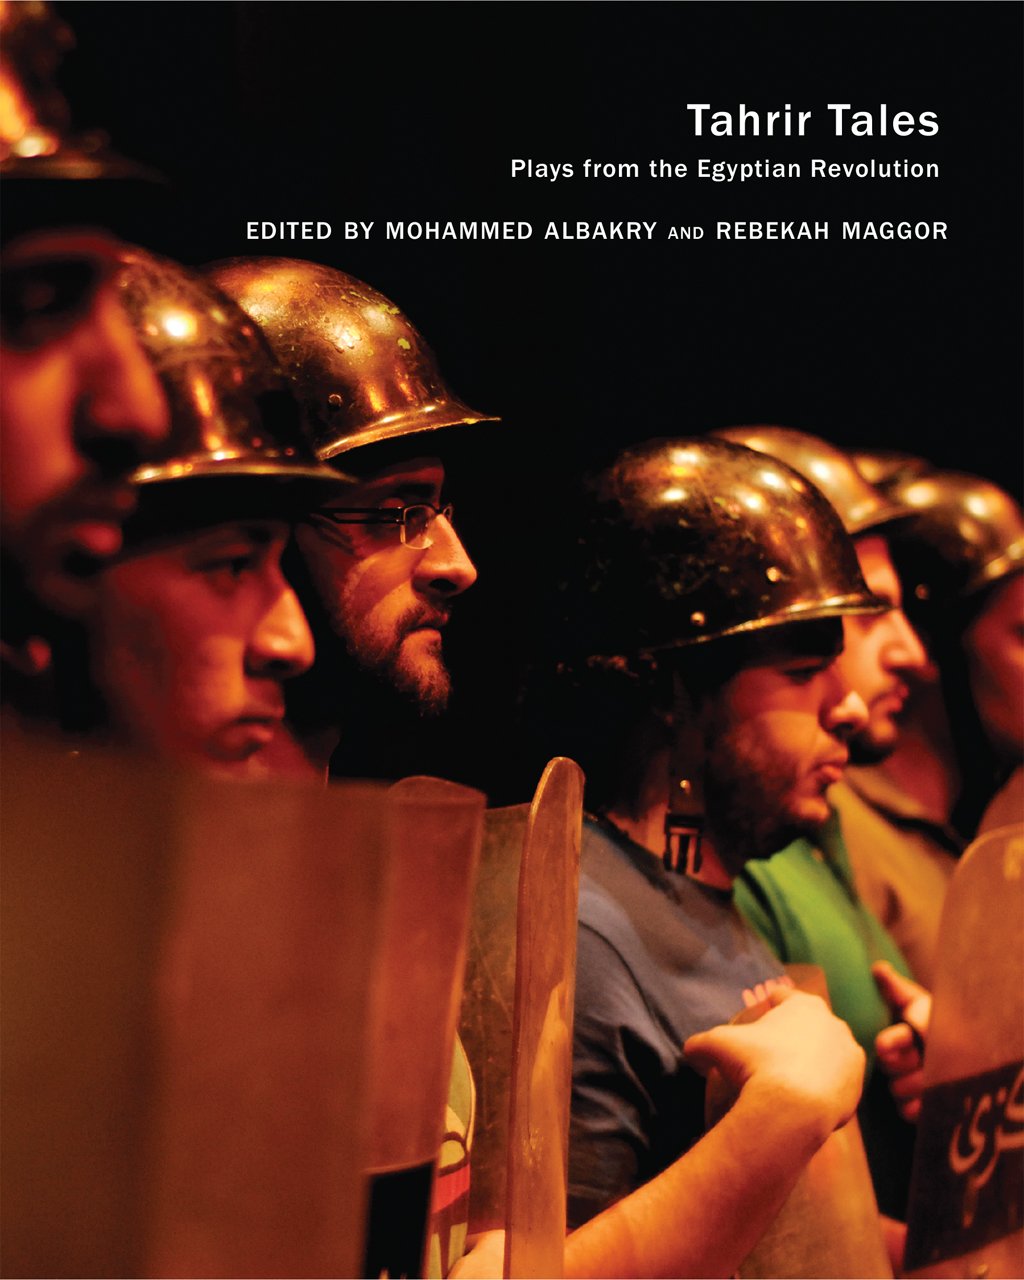 Cover of "Tahrir Tales. Plays from the Egyptian Revolution" (published by Seagull Books)